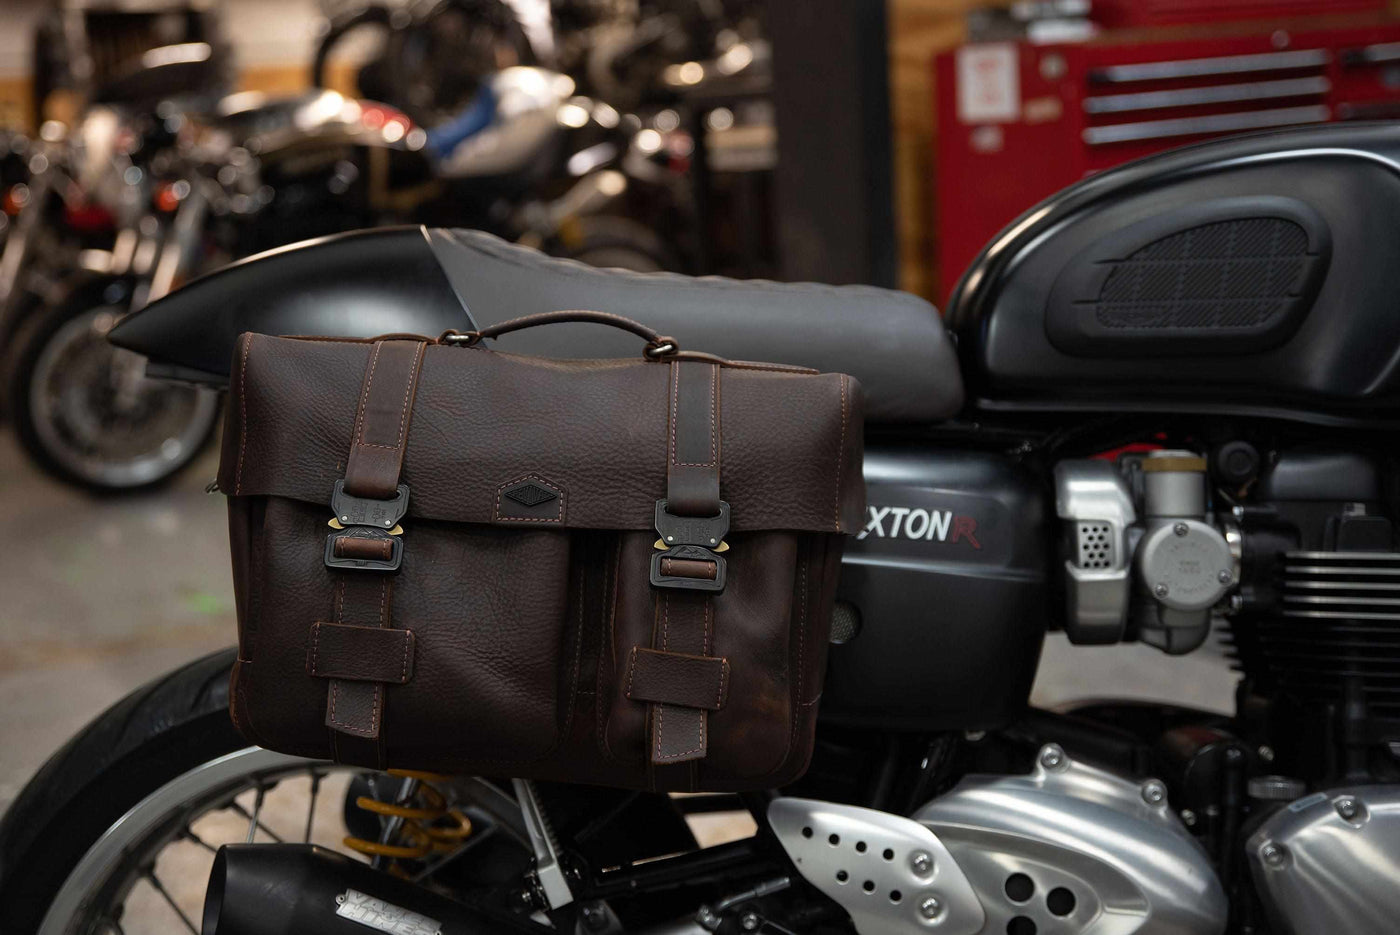 Motorcycle Gear for Fall & Winter at Revival Cycles